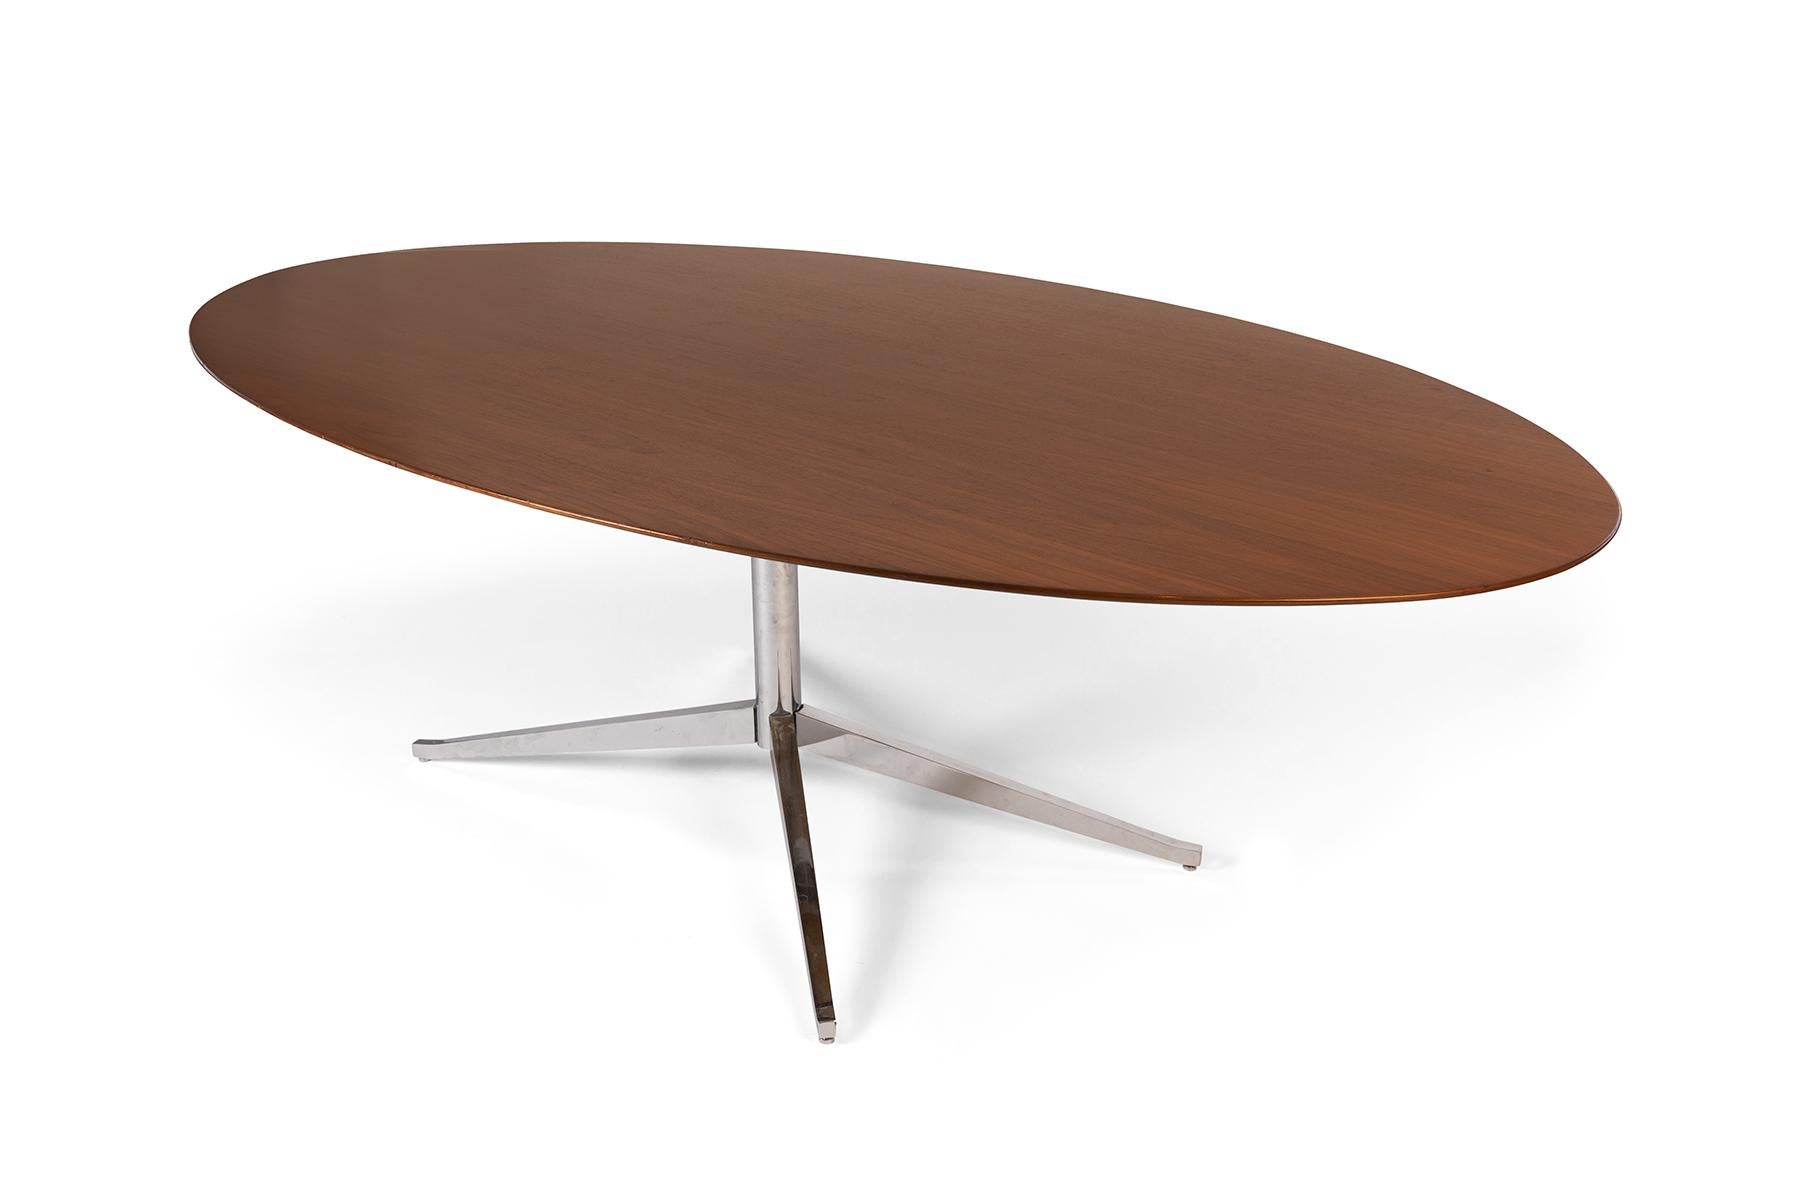 American Knoll Oval Dining Table in Walnut & Chrome-Plated Steel